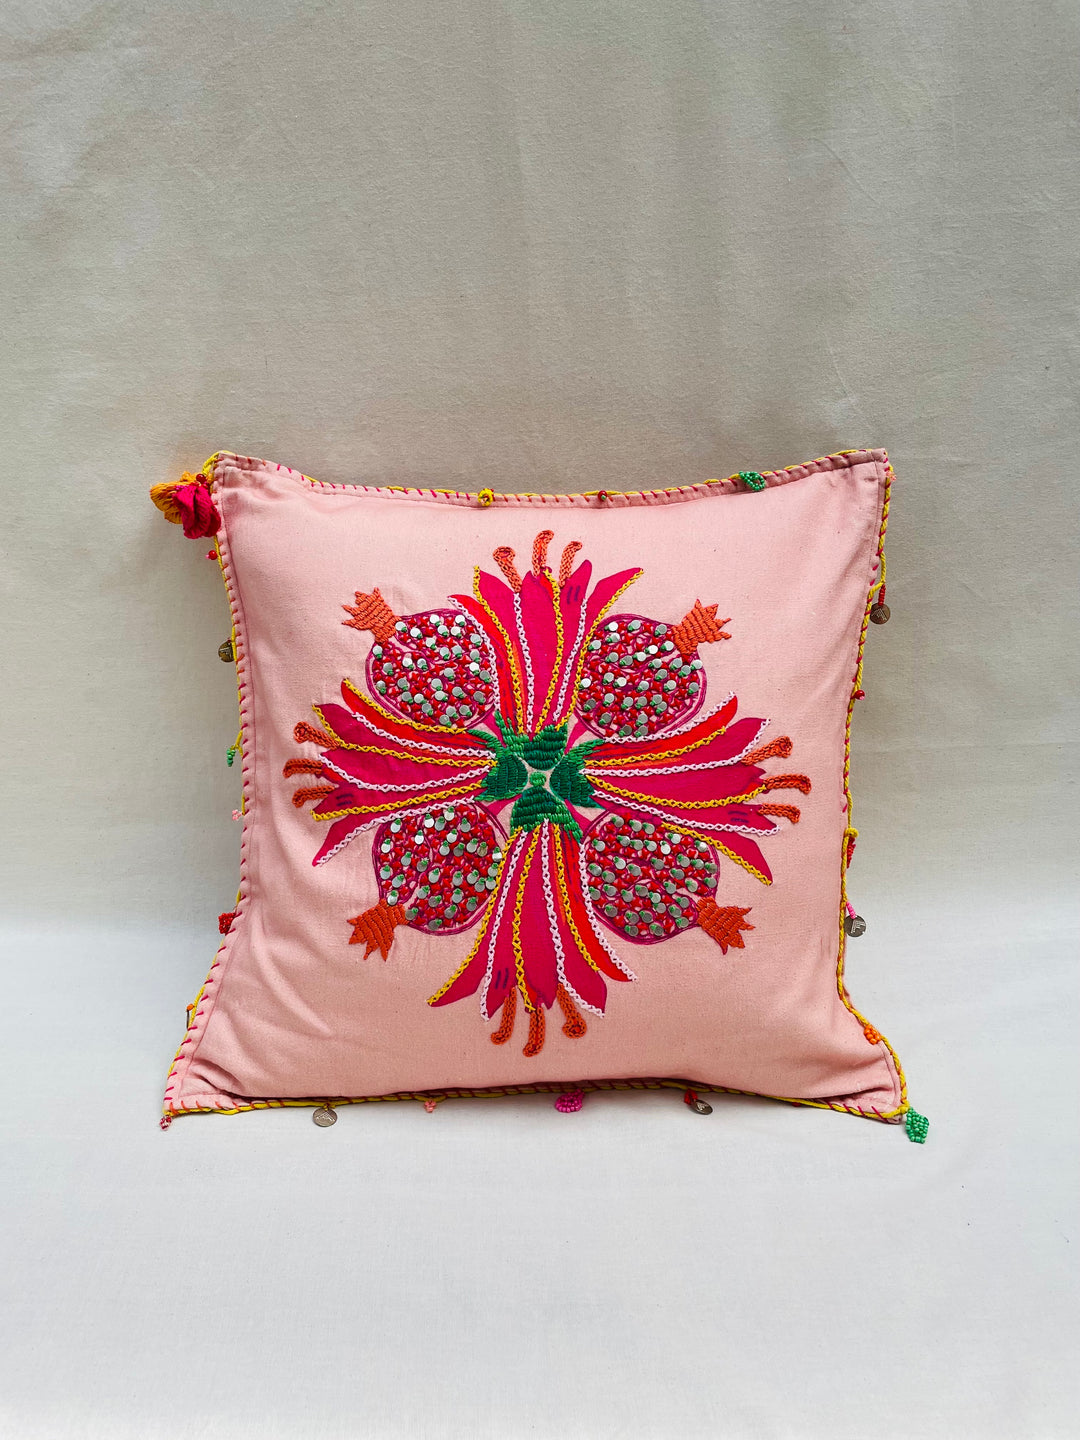 Hand-Embellished Pomegranate Throw Pillow Cover